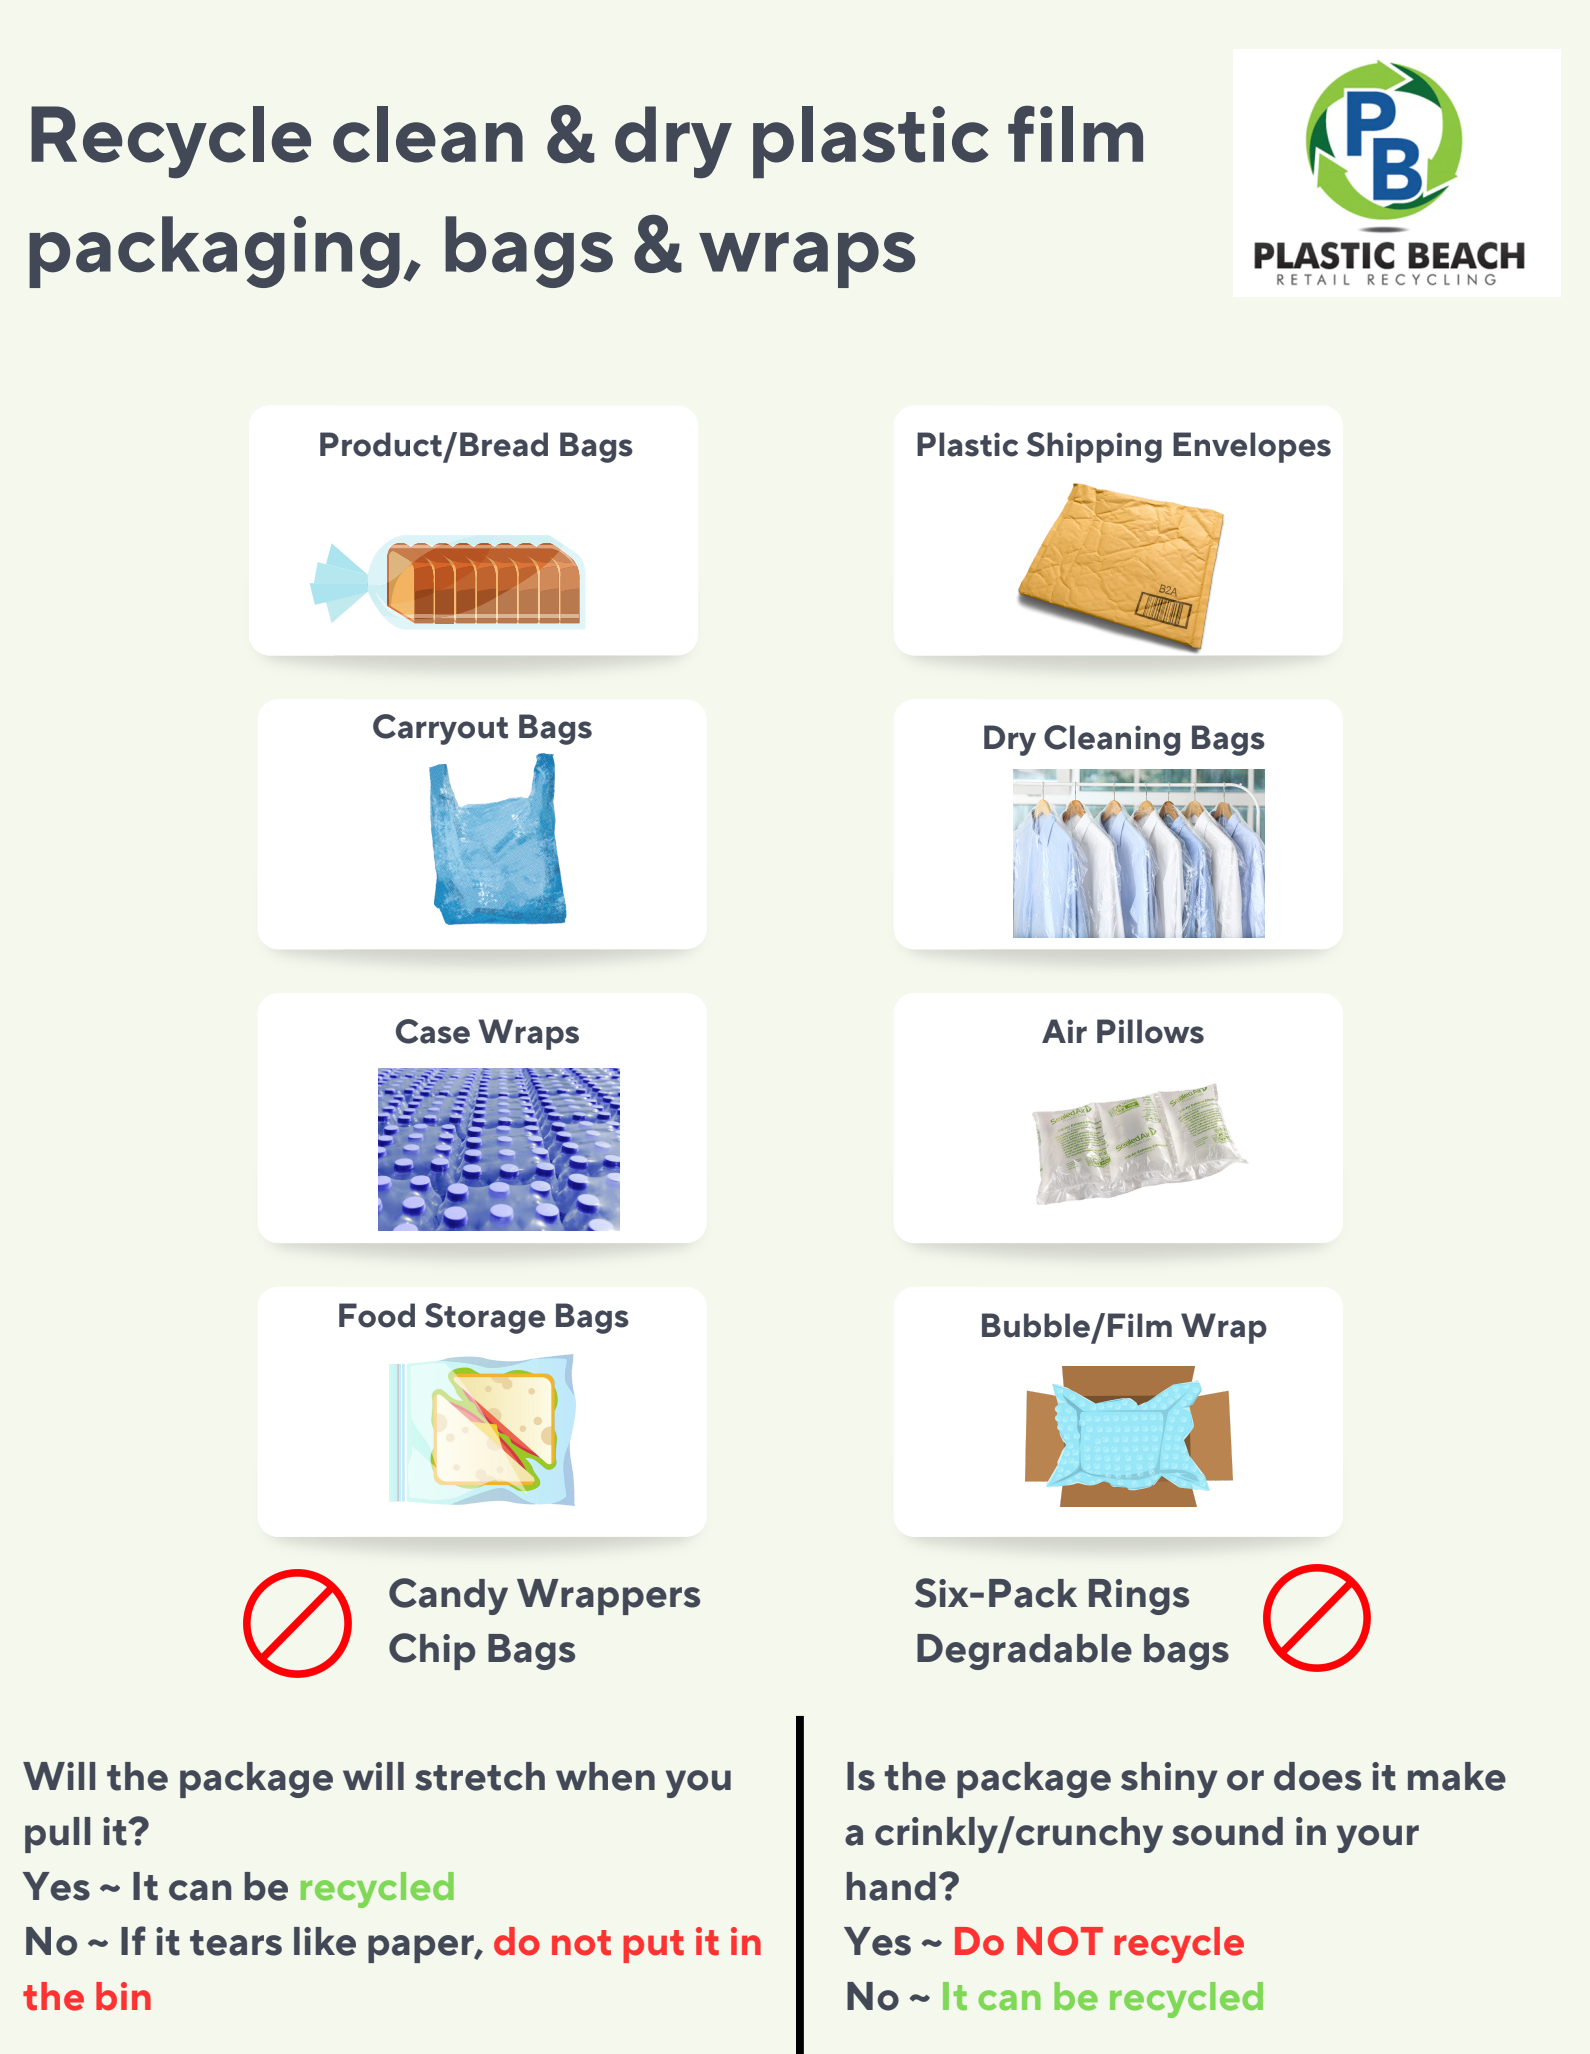 A poster explaining how to recycle clean and dry plastic film packaging bags and wraps